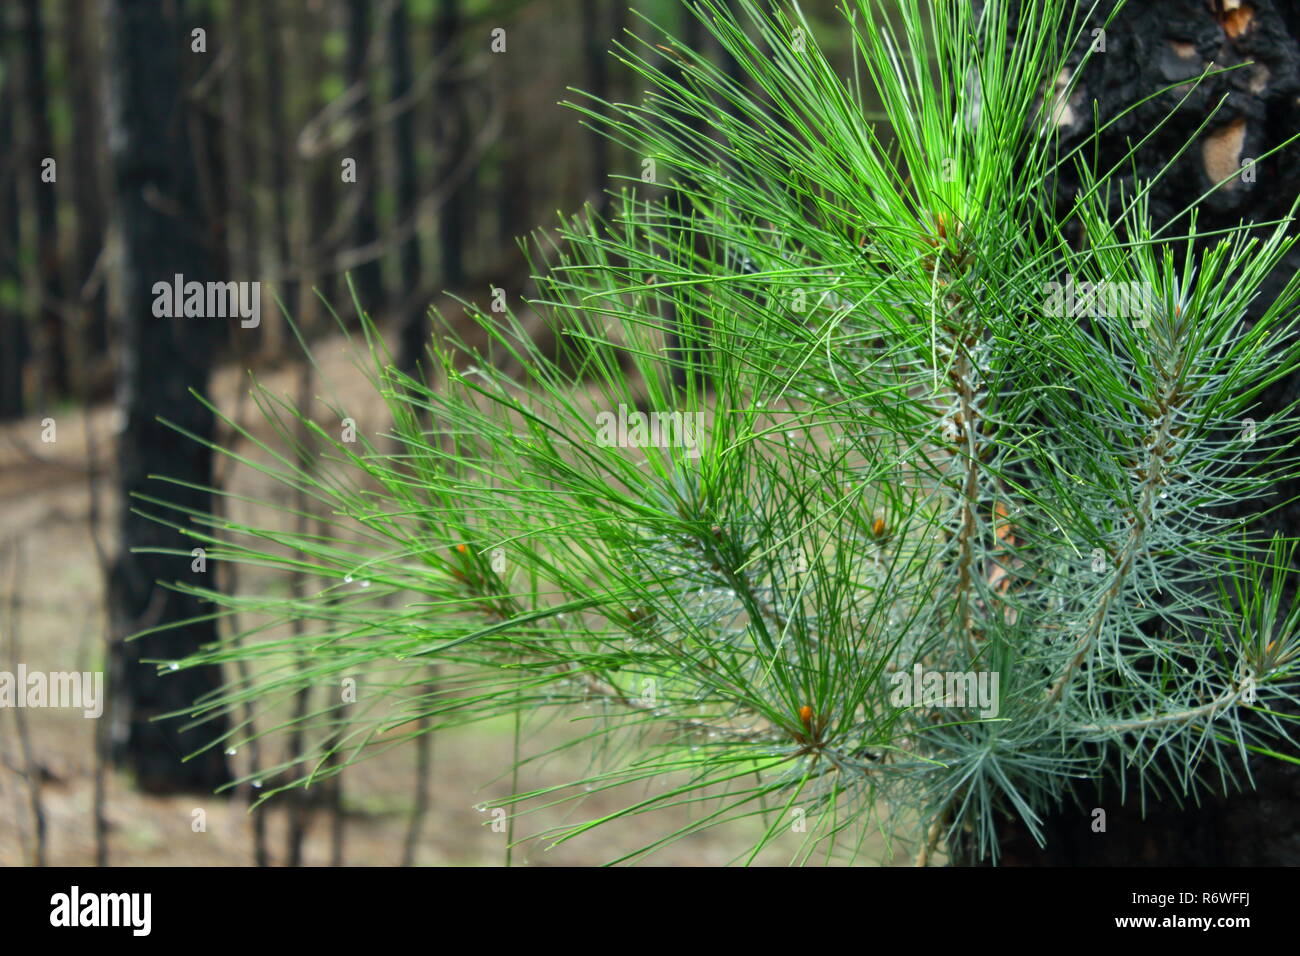 branch in pine forest Stock Photo